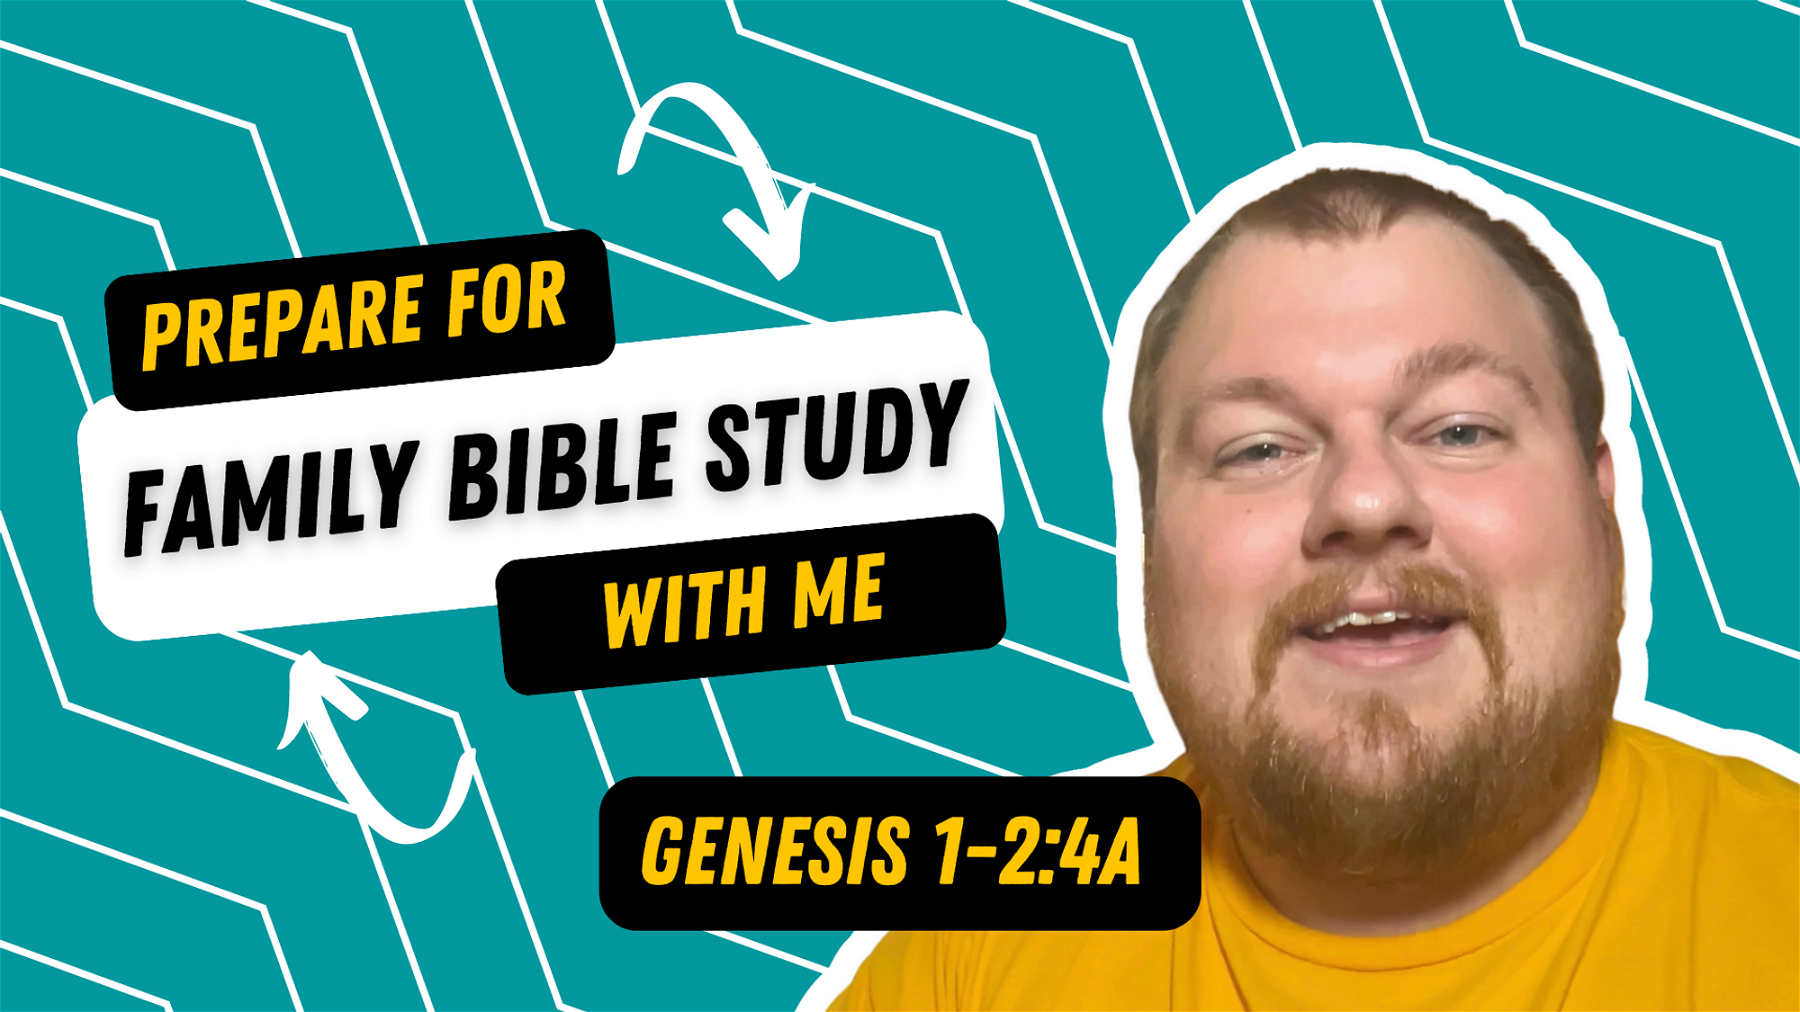 Let’s Study Genesis 1:1-2:4a! - Prepare for Family Bible Study with Me